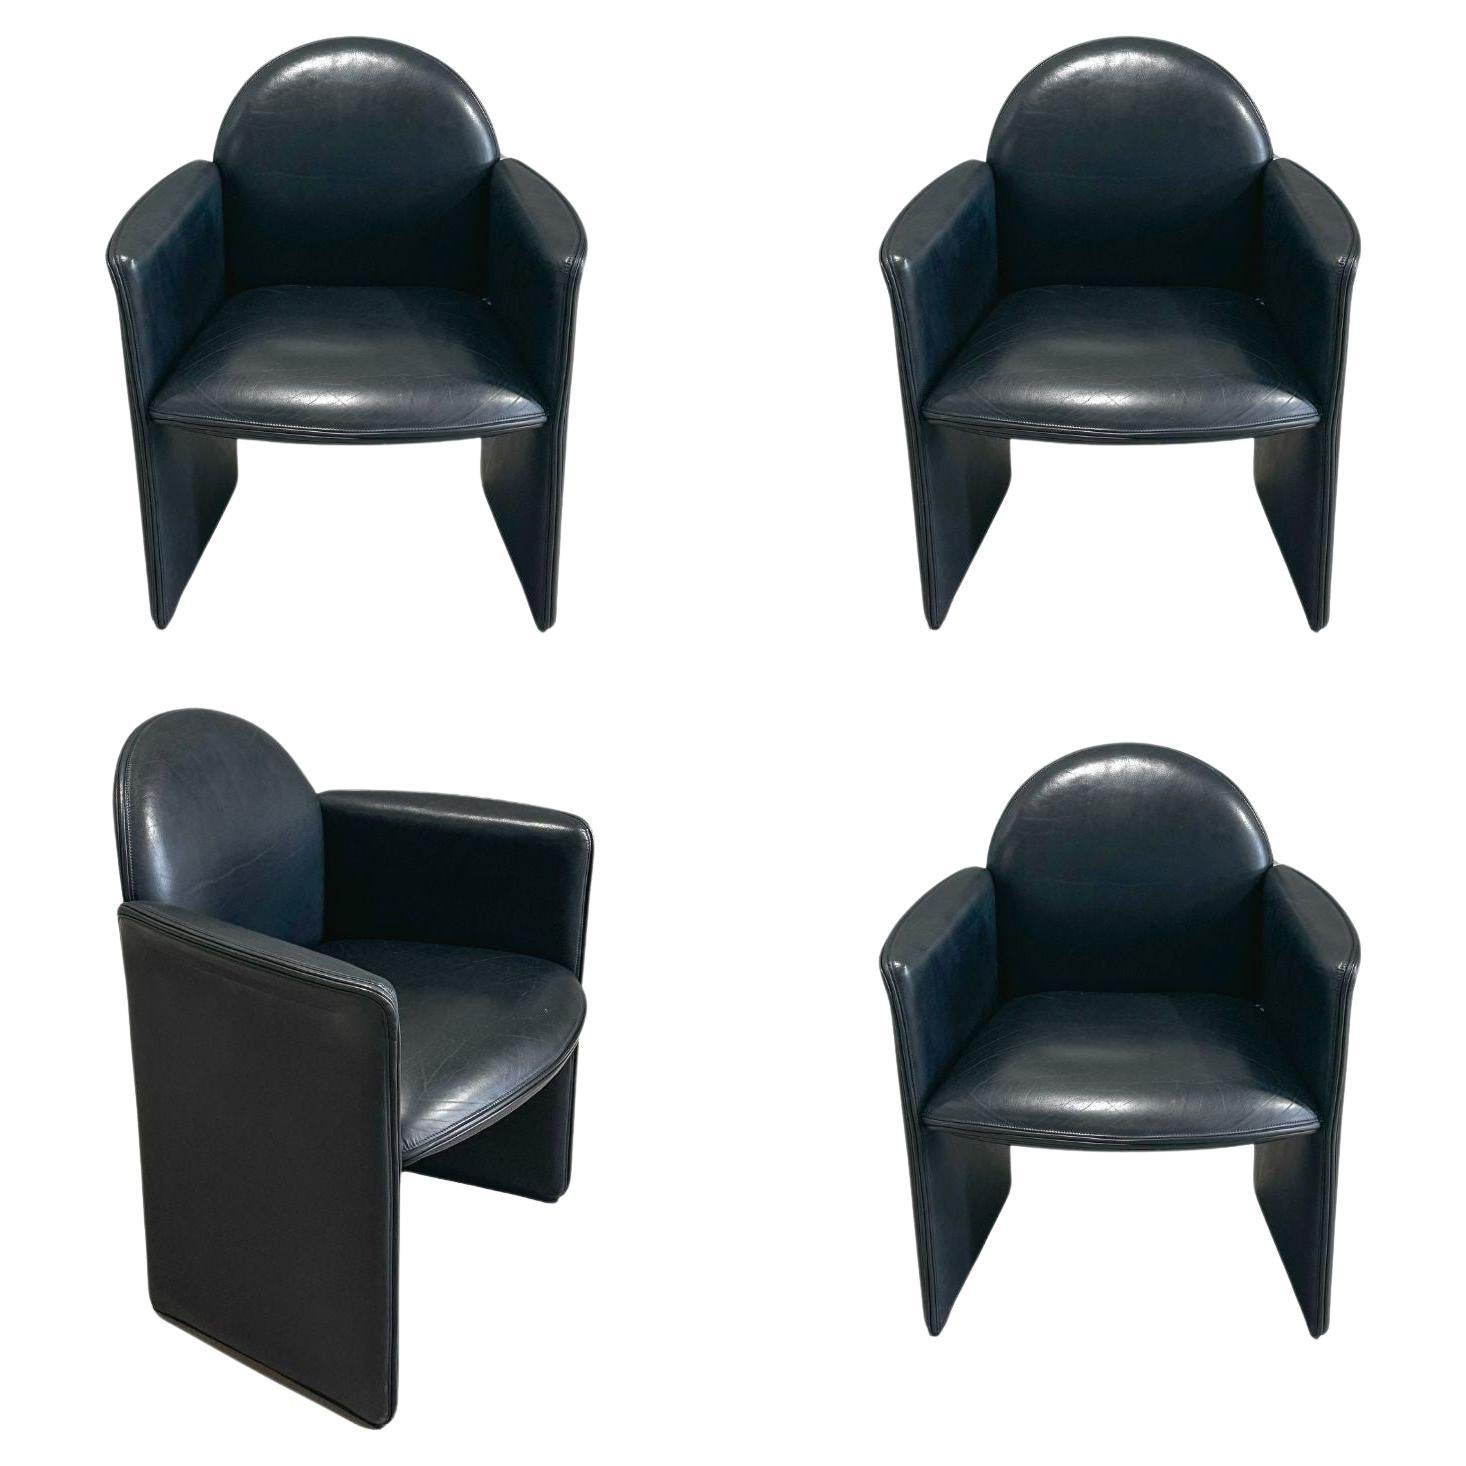 Set 4 Black Leather Italian Chairs, Italy 1980 For Sale